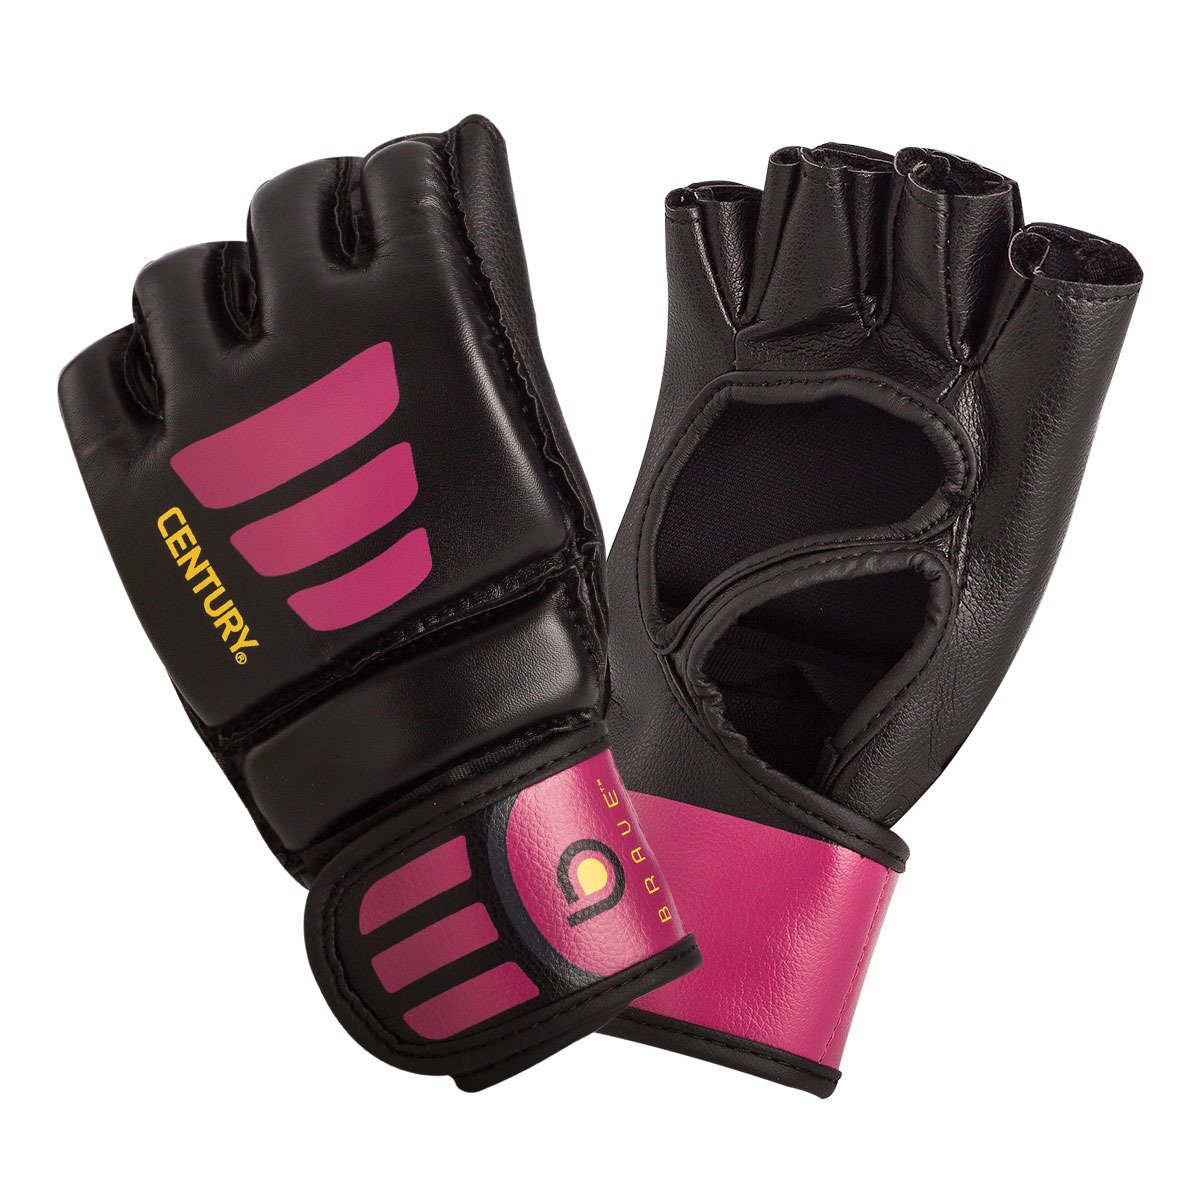 15 Minute Academy Workout Gloves with Comfort Workout Clothes